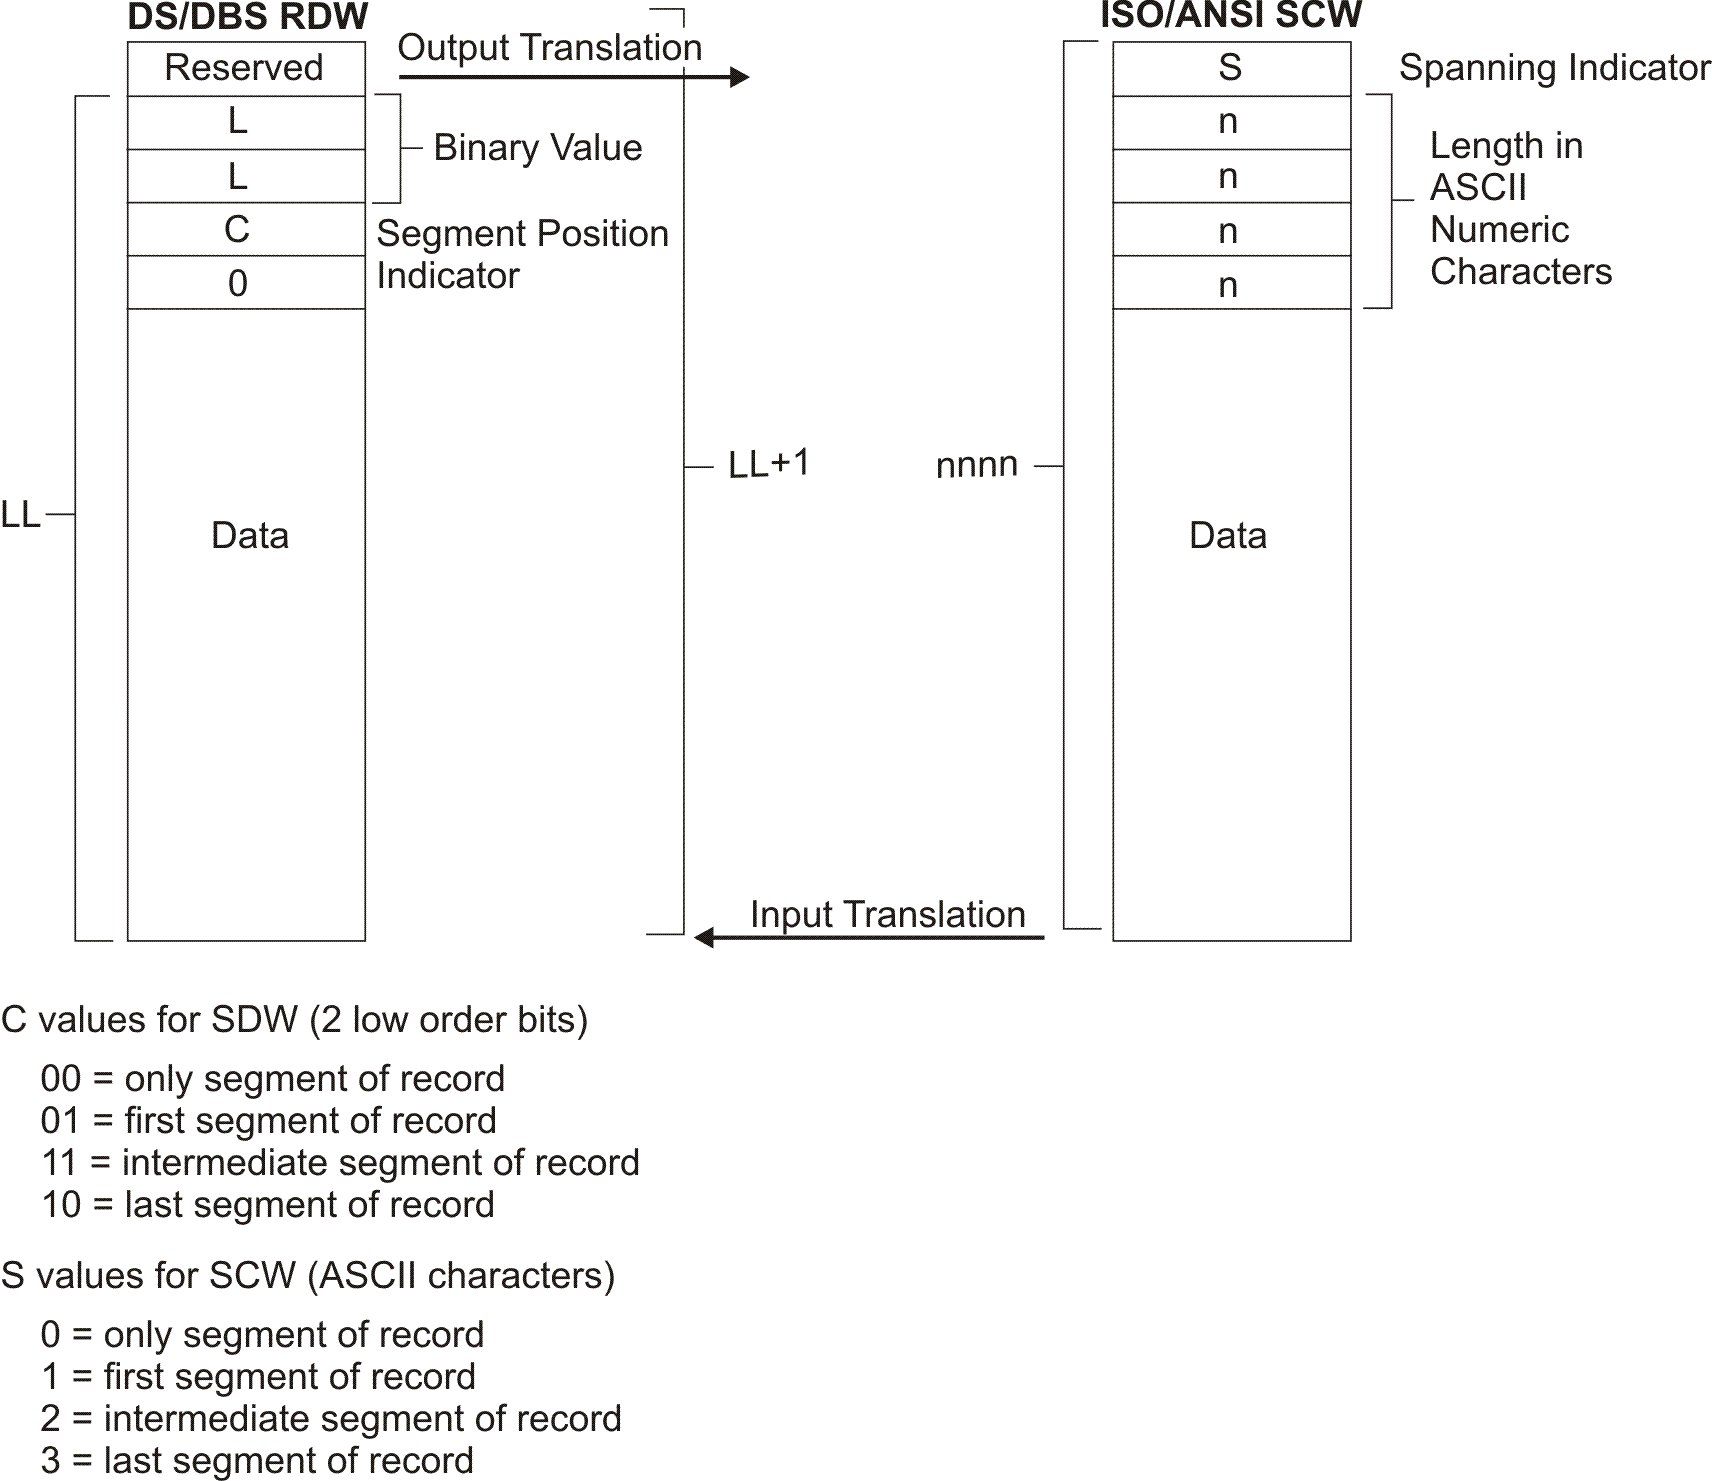 The SCW is expressed in ASCII characters and is 5 bytes long. The SDW is expressed in binary. The values for C in the SDW (2 low-order bits) are 00 (only segment of record), 01 (first segment of record), 11 (intermediate segment of record) and 10 (last segment of record). The values for S in the SCW (spanning indicator) are 0 (only segment of record), 0 (first segment of record), 2 (intermediate segment of record) and 3 (last segment of record)